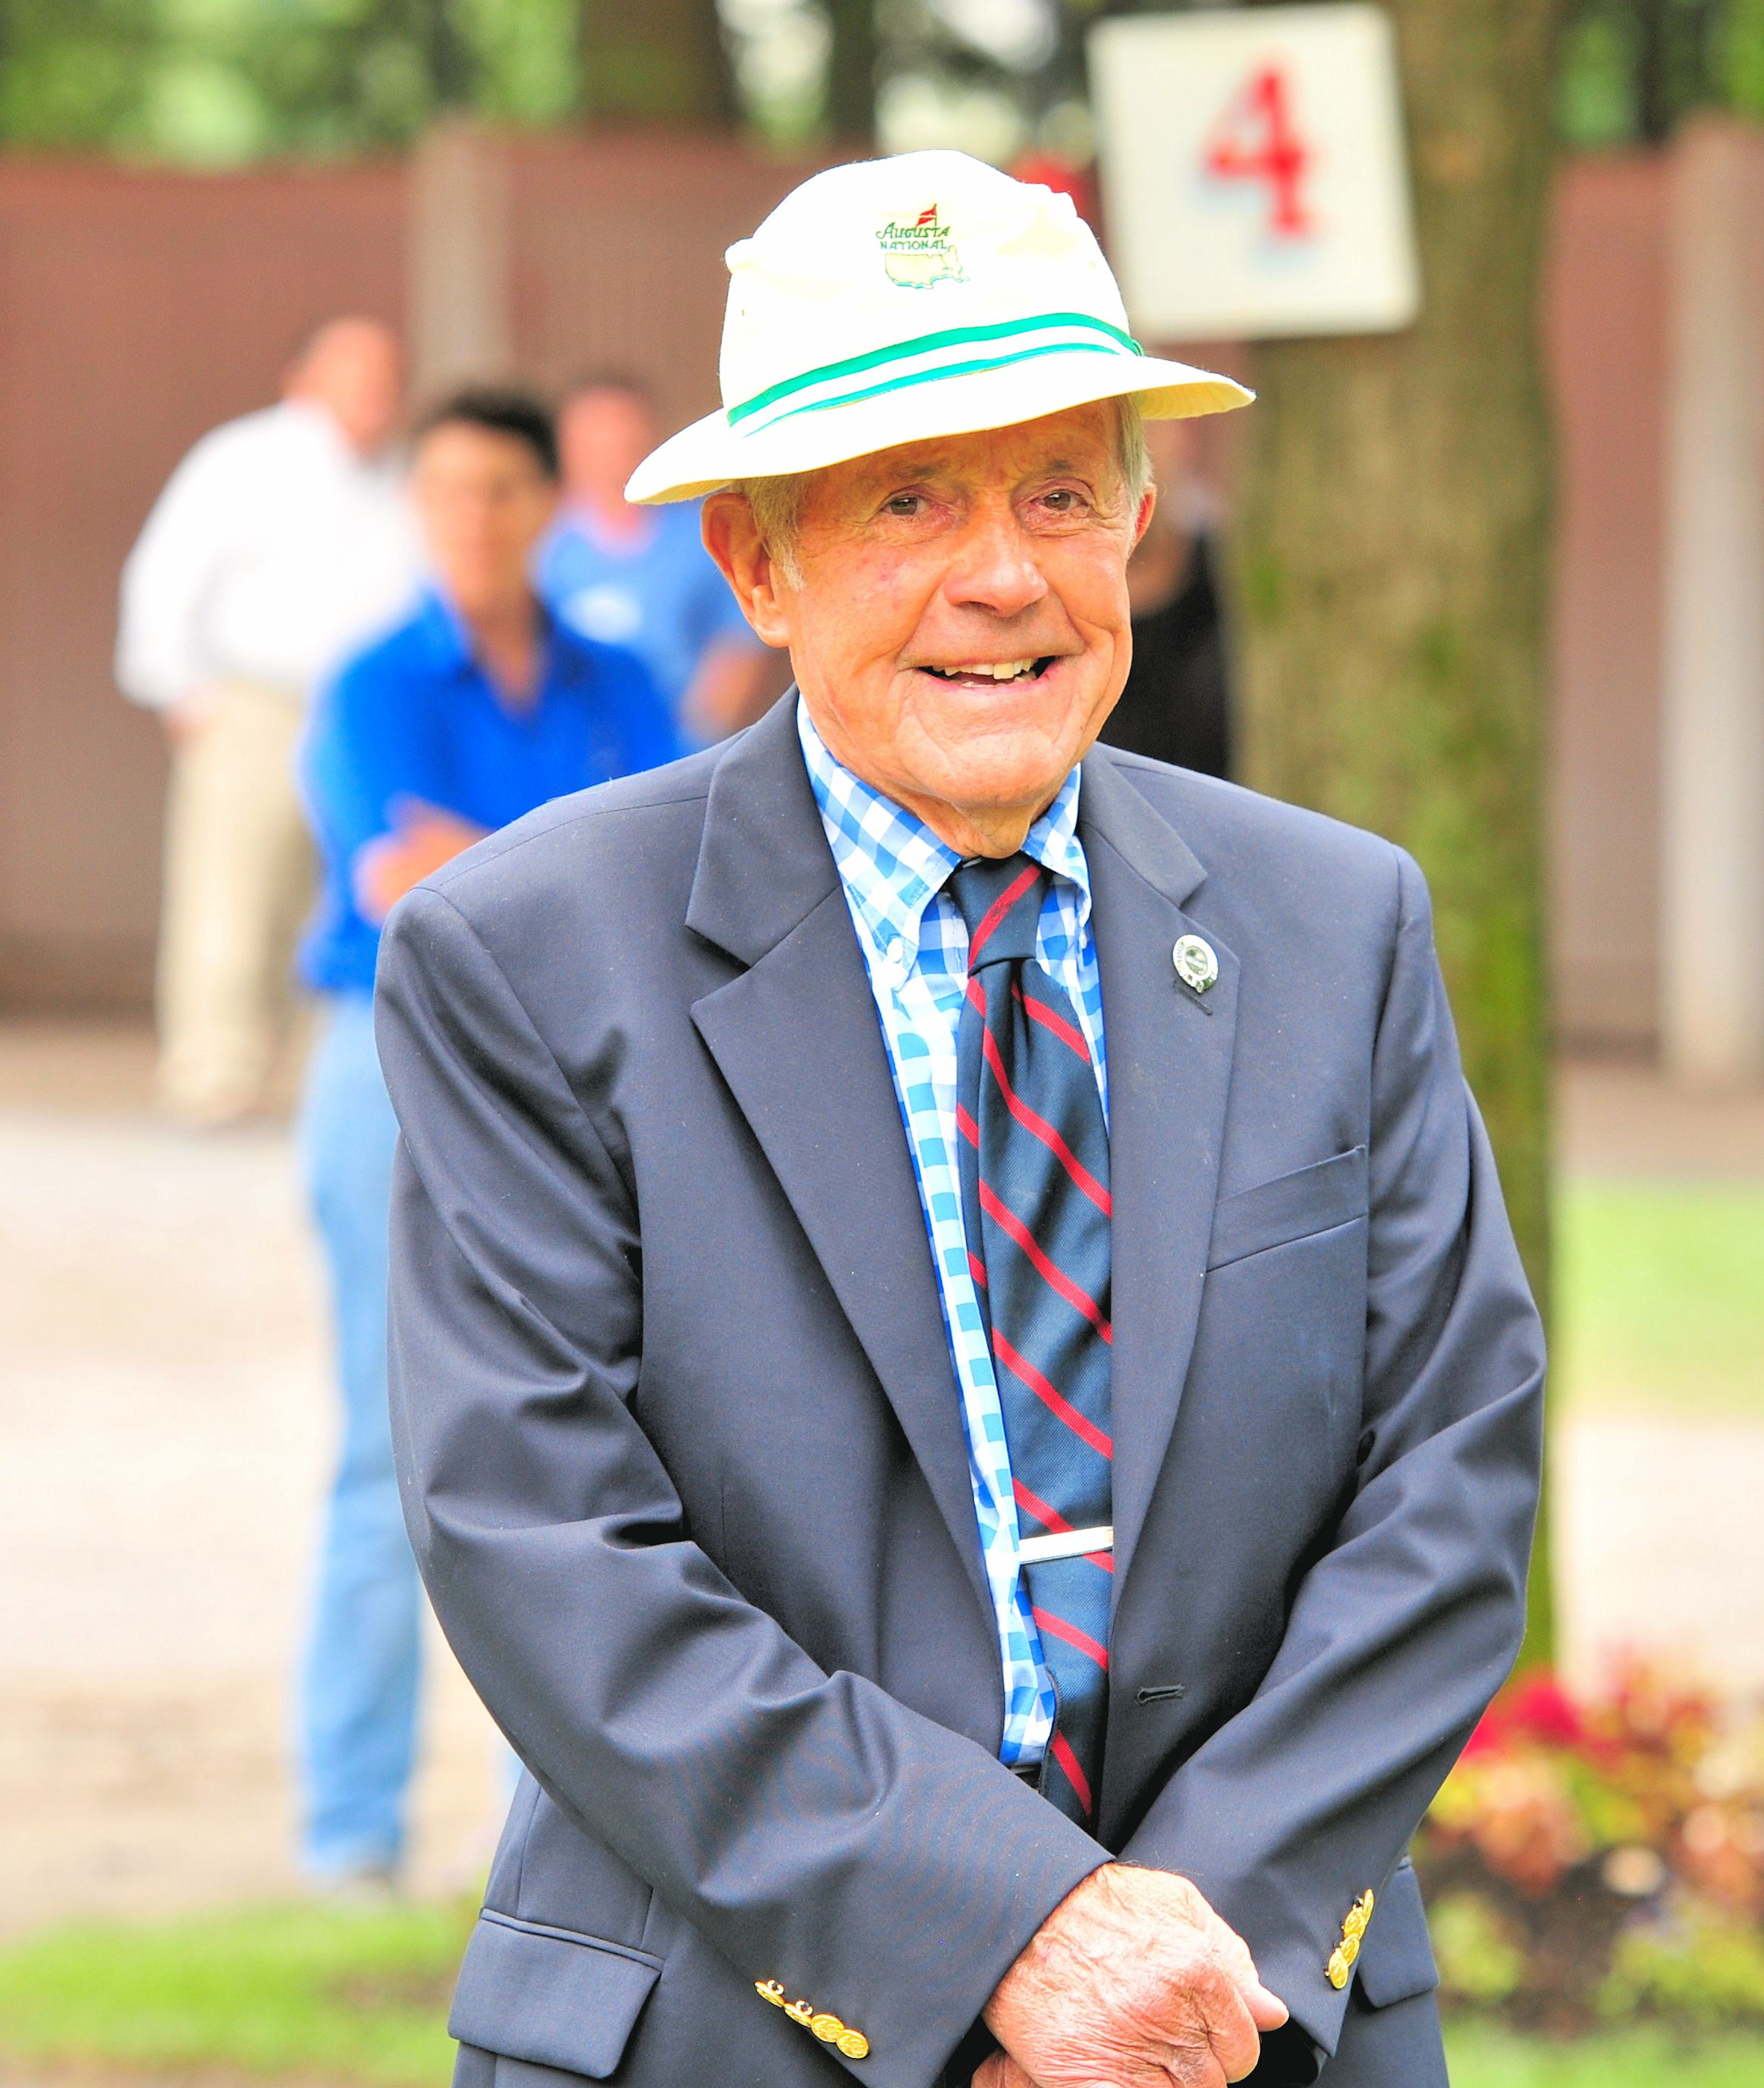 Cot Cambell in the paddock at Saratoga Race Course, September 2013 (Brien Bouyea)